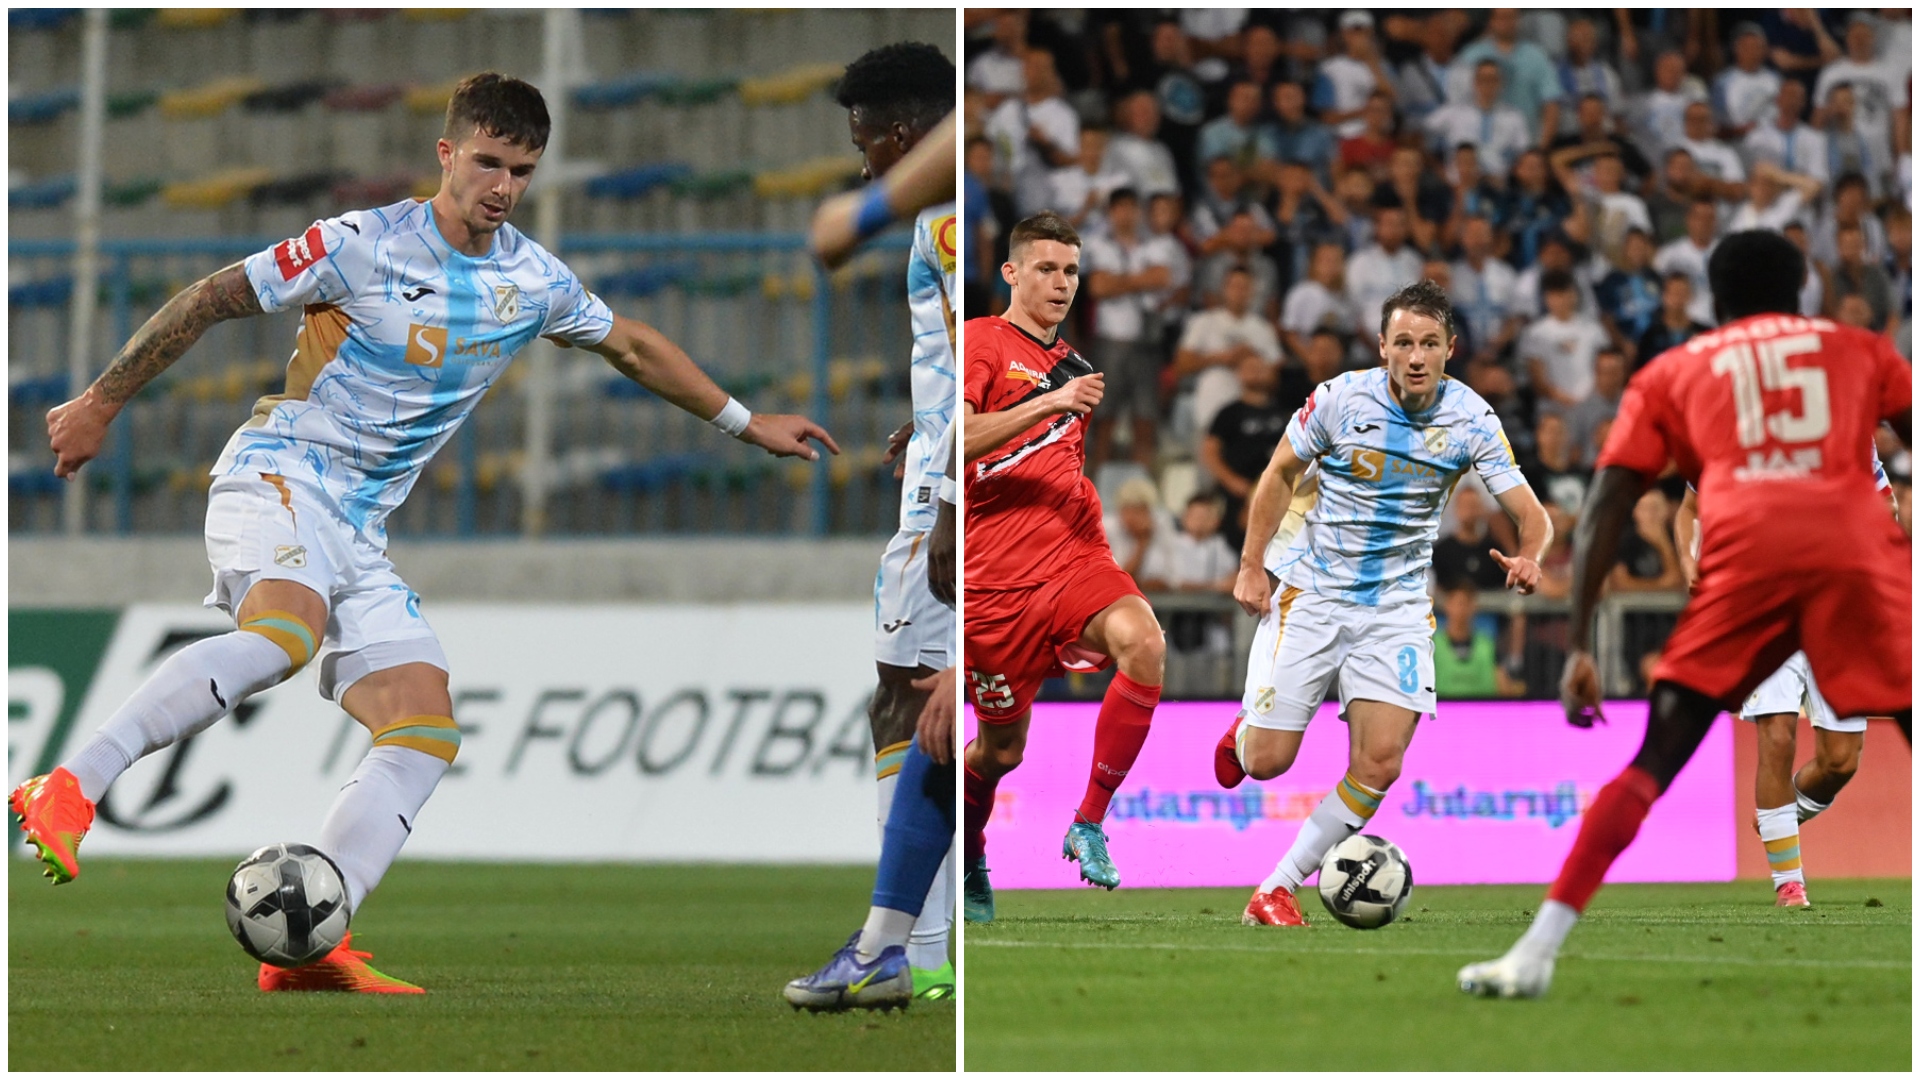 Ivan Lepinjica and Adrian Liber leave HNK Rijeka to sign for NK Slaven  Belupo : r/soccer